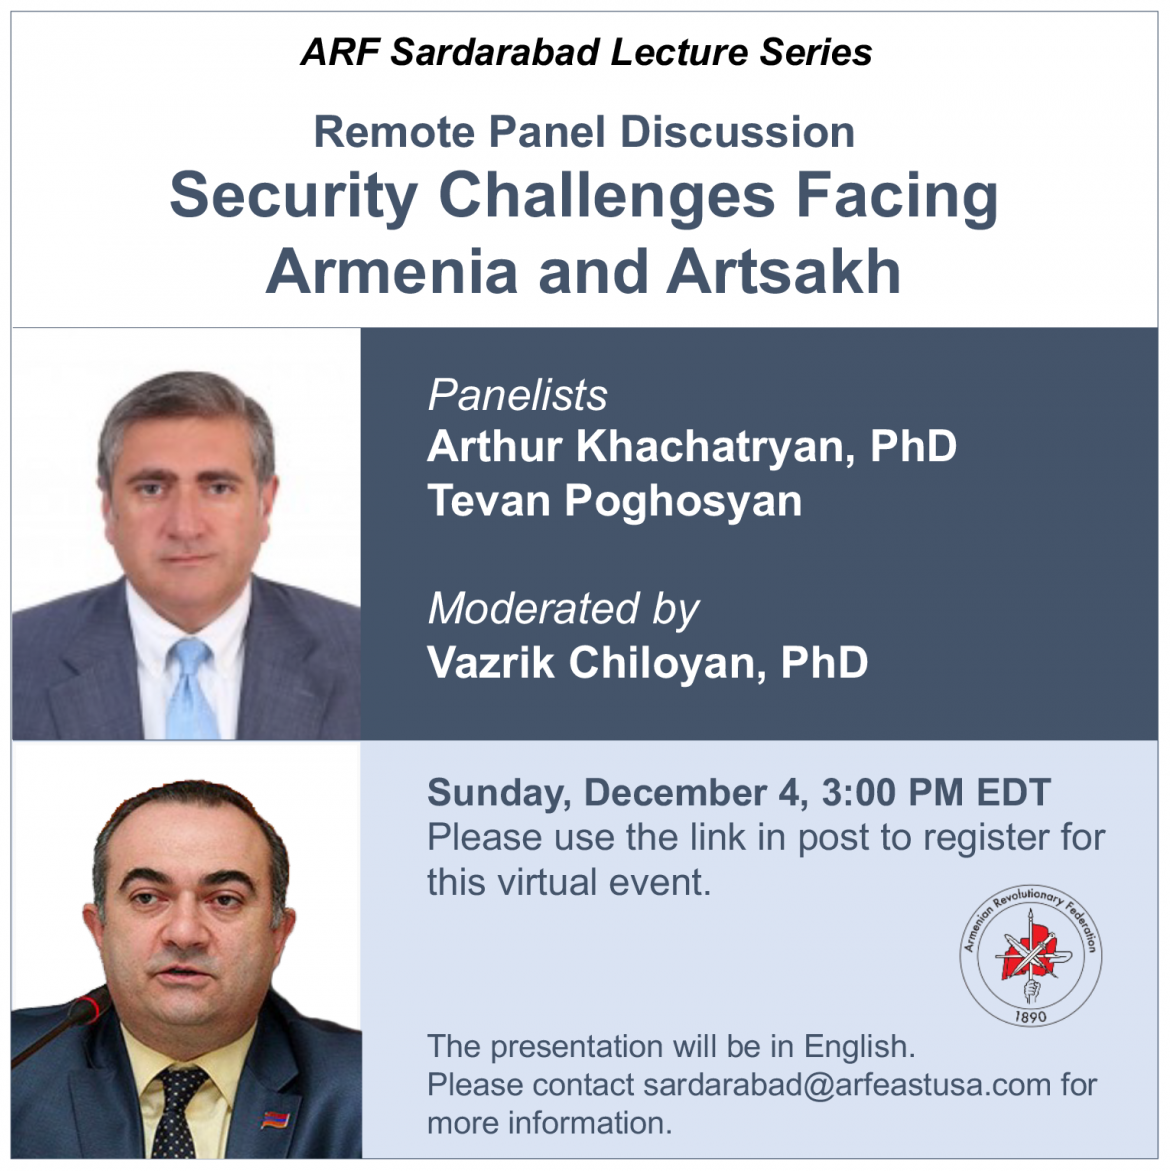 Security Challenges Facing Armenia and Artsakh